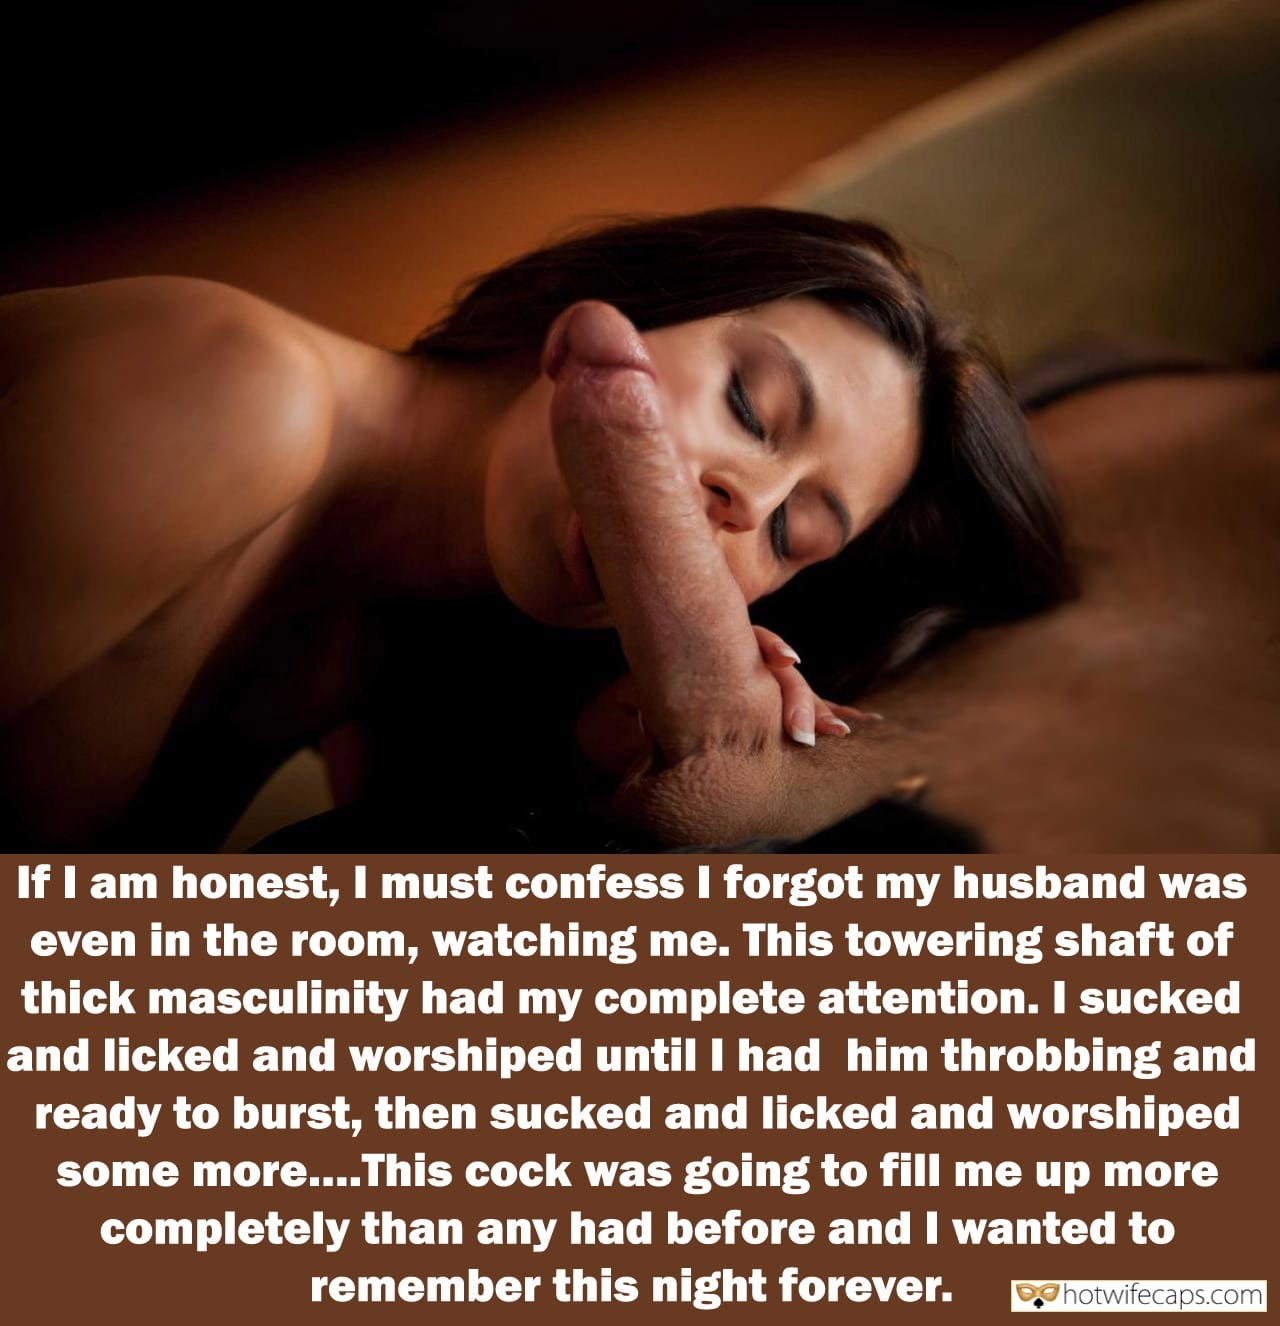 wifesharing blowjob bigger dick hotwife caption Hotwifes confession about first sharing experience